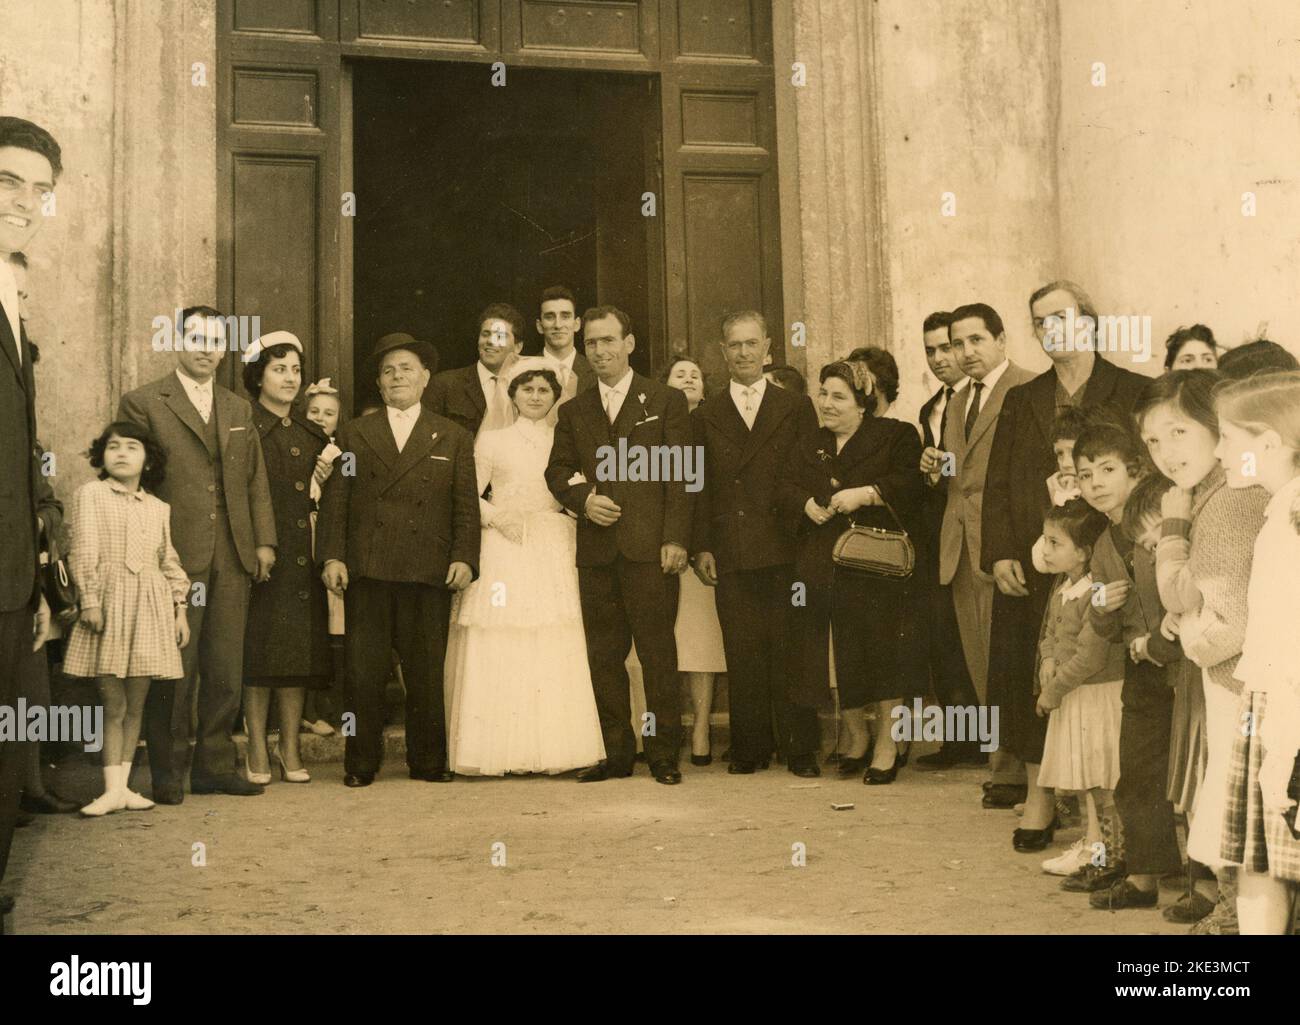 Wedding in a village in central Italy: The Bride and the Groom just married out of the church with friends and relatives, 1950s Stock Photo